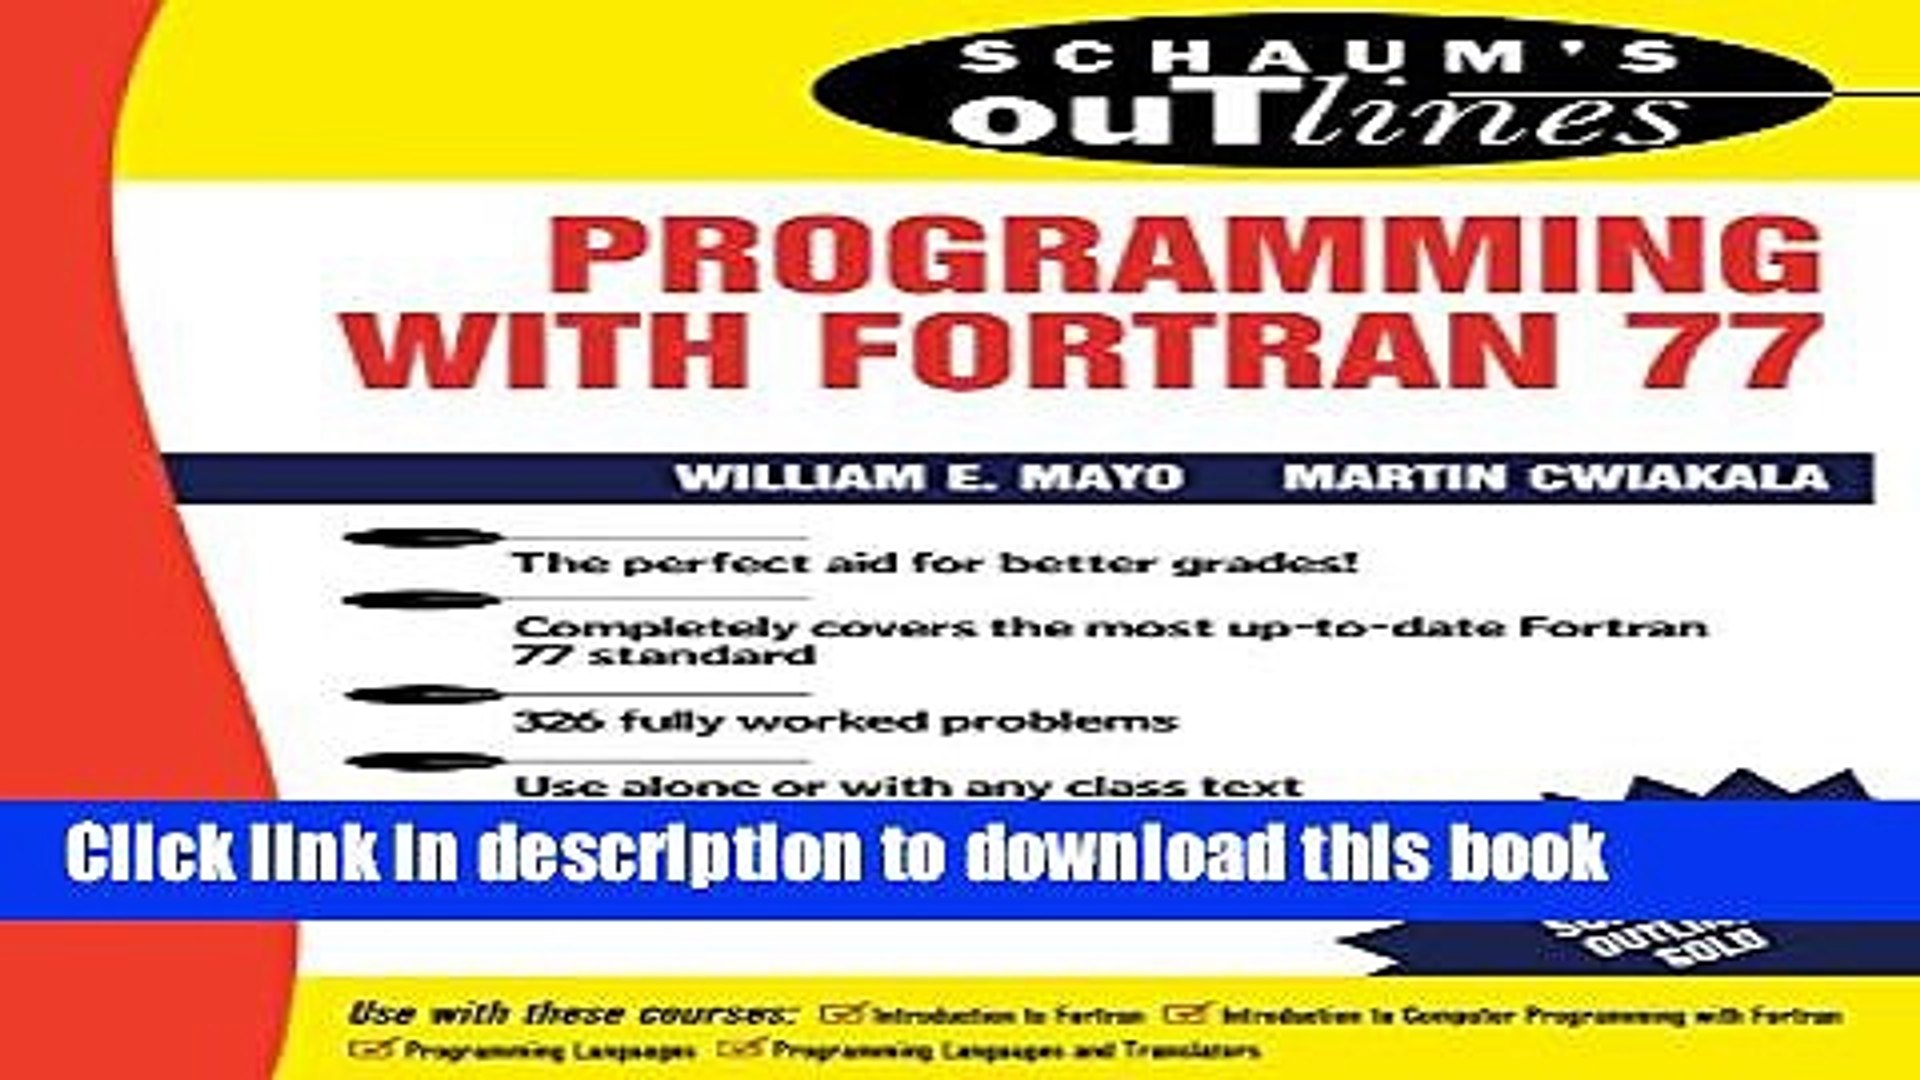 schaum outline of programming with fortran 77 pdf viewer